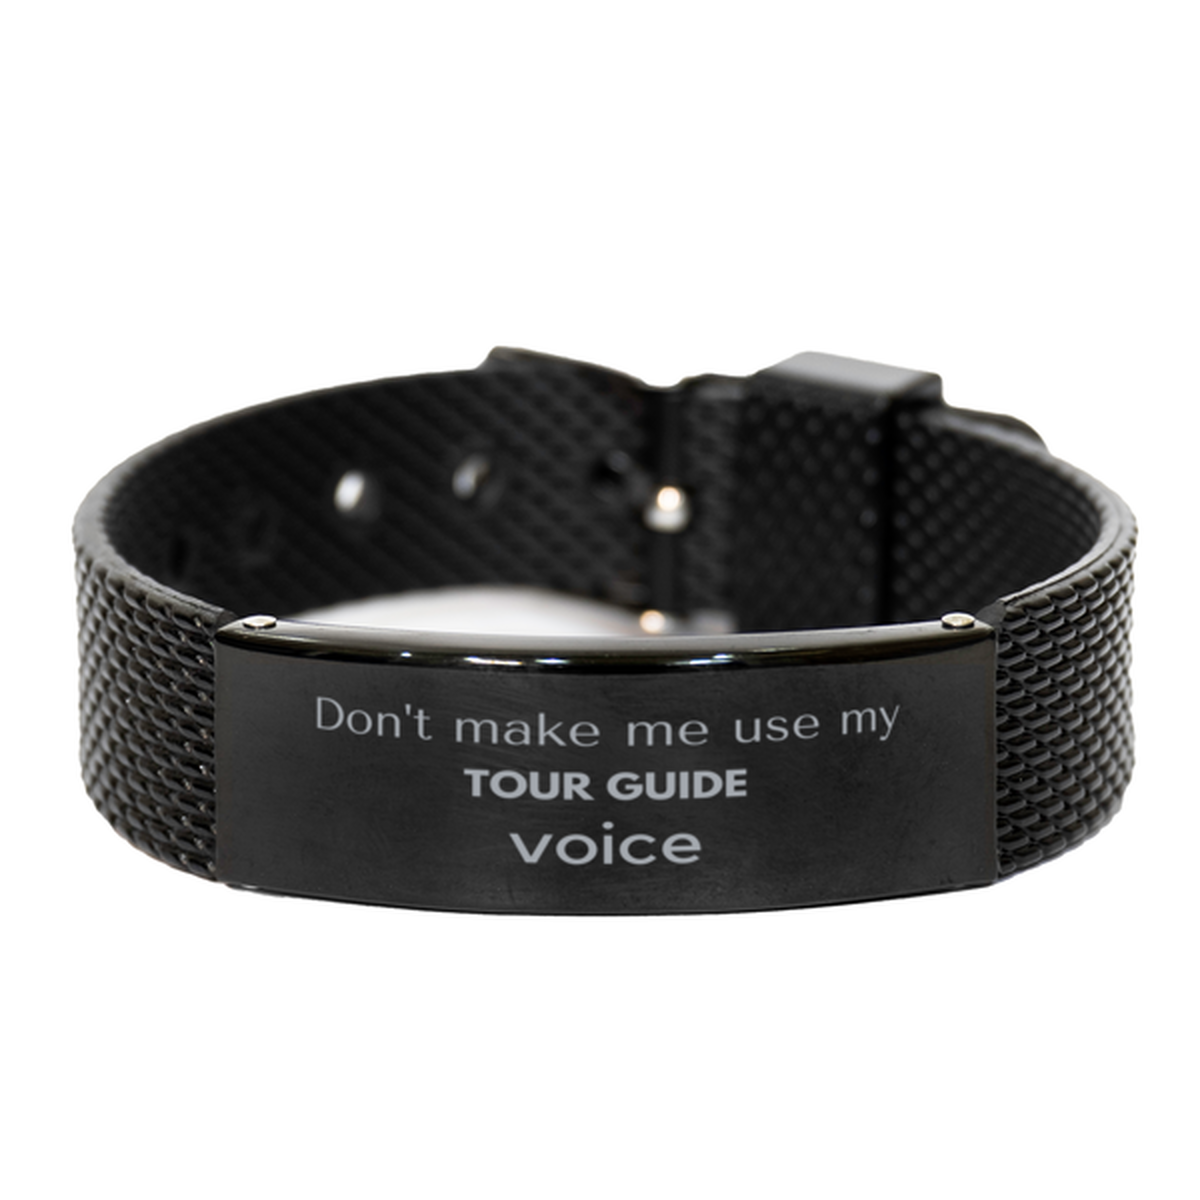 Don't make me use my Tour Guide voice, Sarcasm Tour Guide Gifts, Christmas Tour Guide Black Shark Mesh Bracelet Birthday Unique Gifts For Tour Guide Coworkers, Men, Women, Colleague, Friends